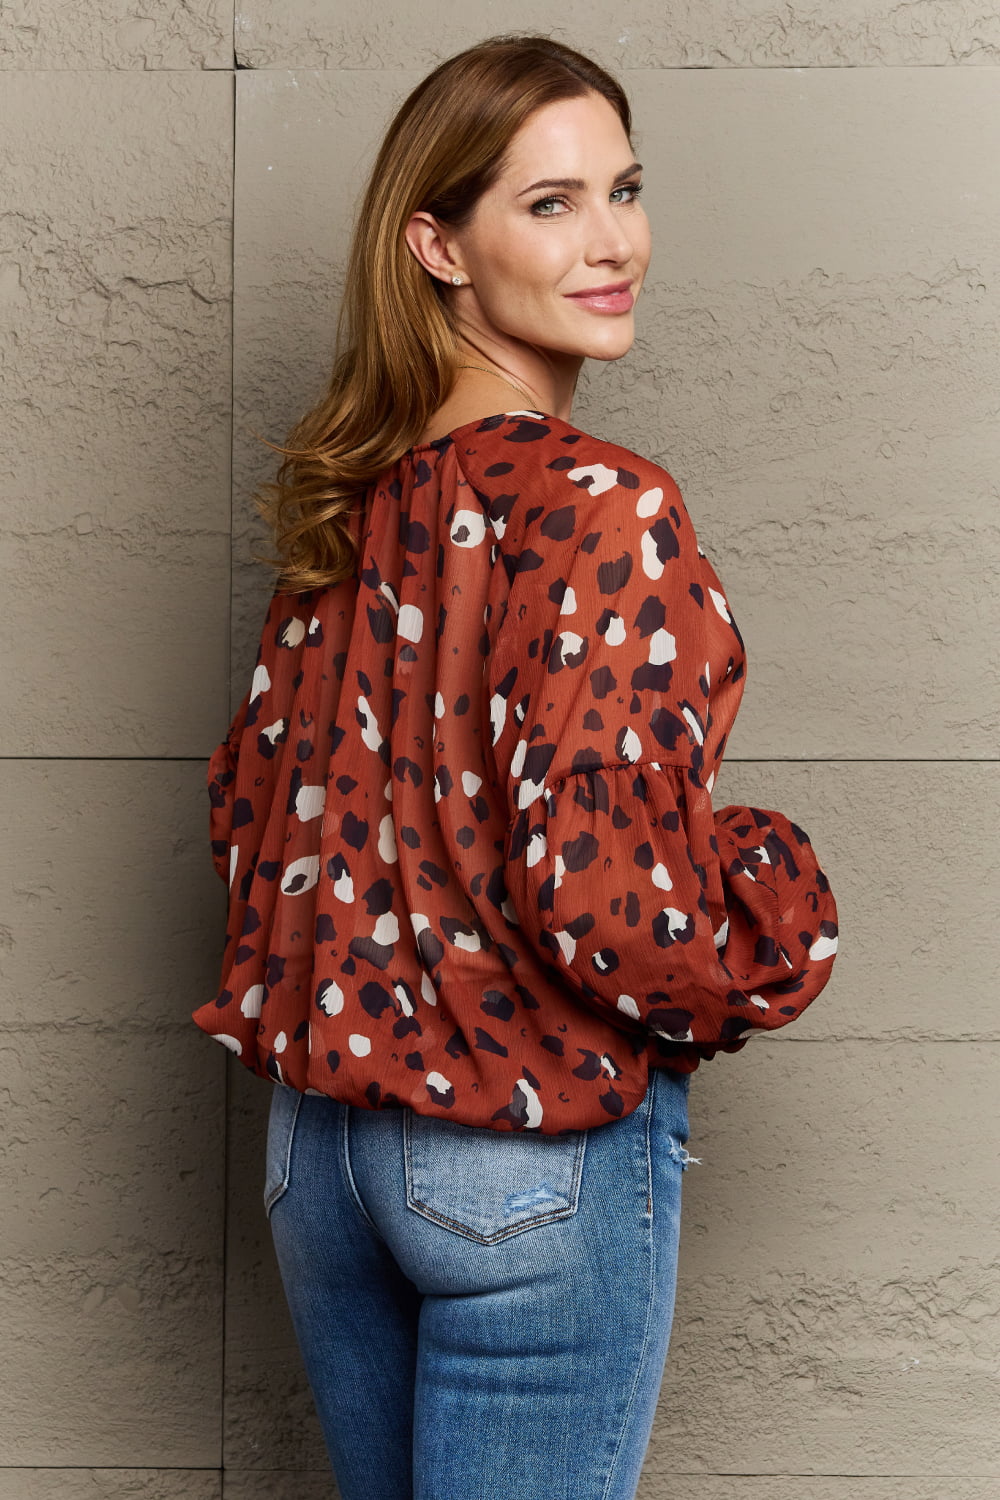 Hailey & Co Come See Me Spotted Printed Chiffon Blouse